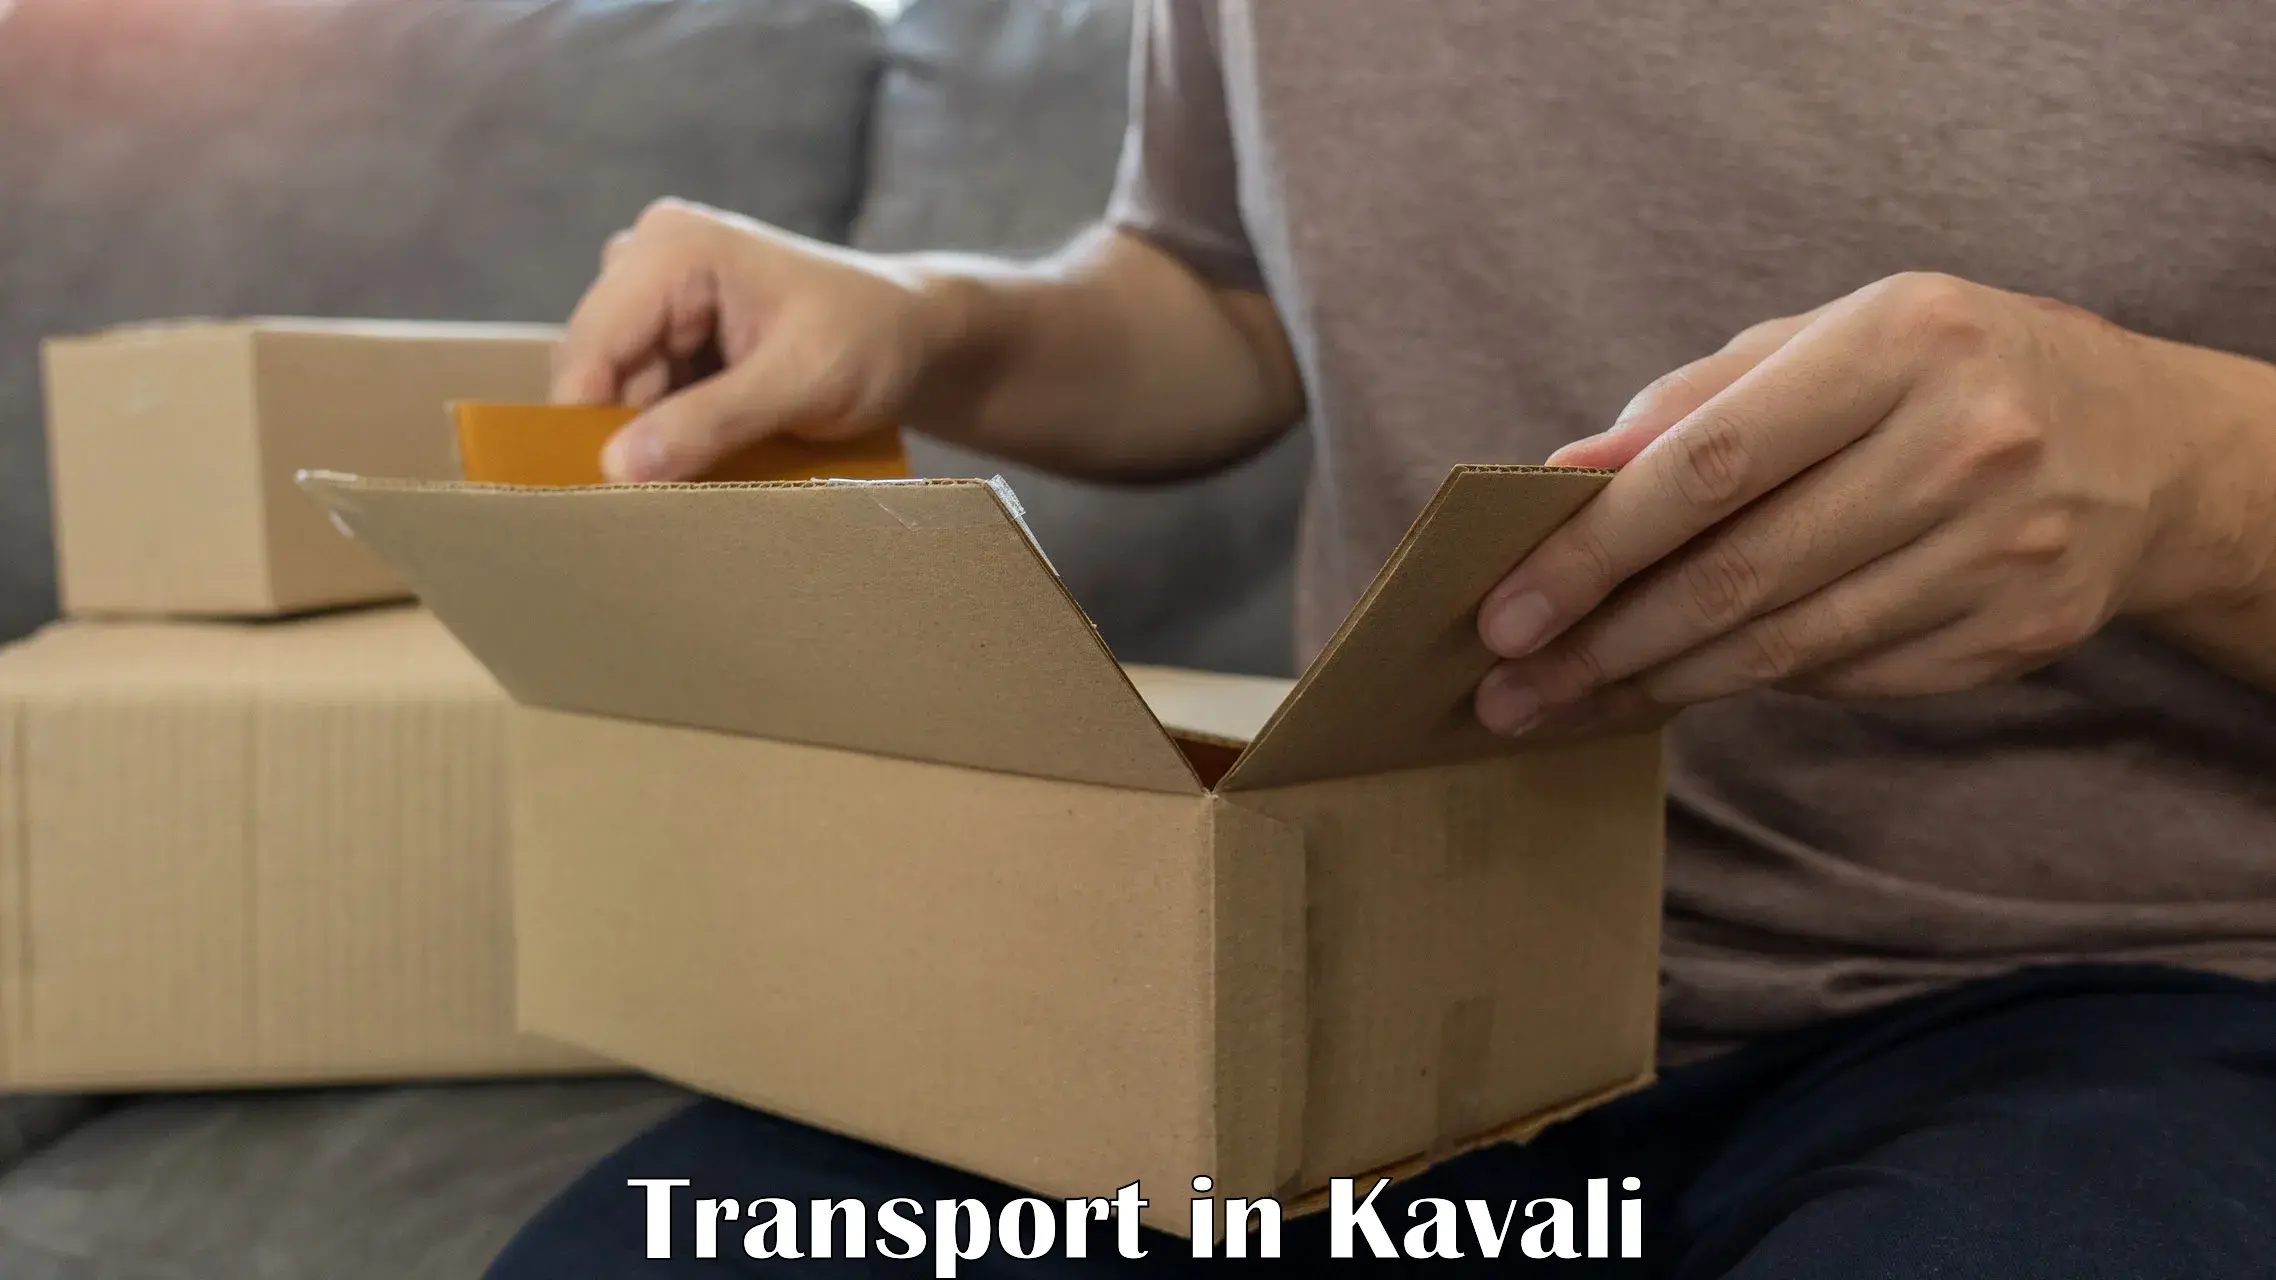 Delivery service in Kavali